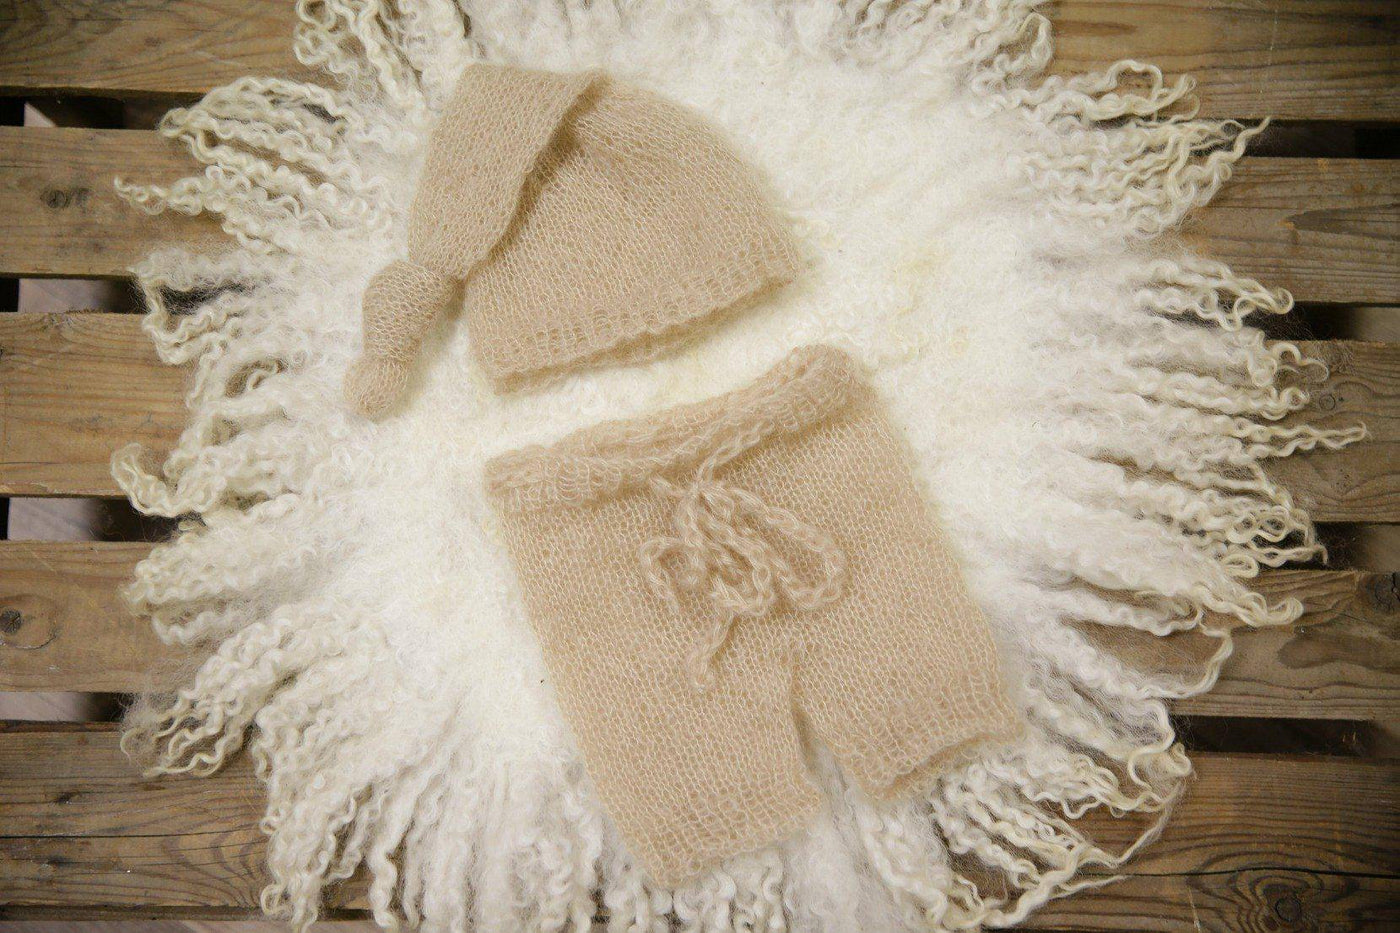 Beige Mohair Knot Hat and Shorts Set - Beautiful Photo Props